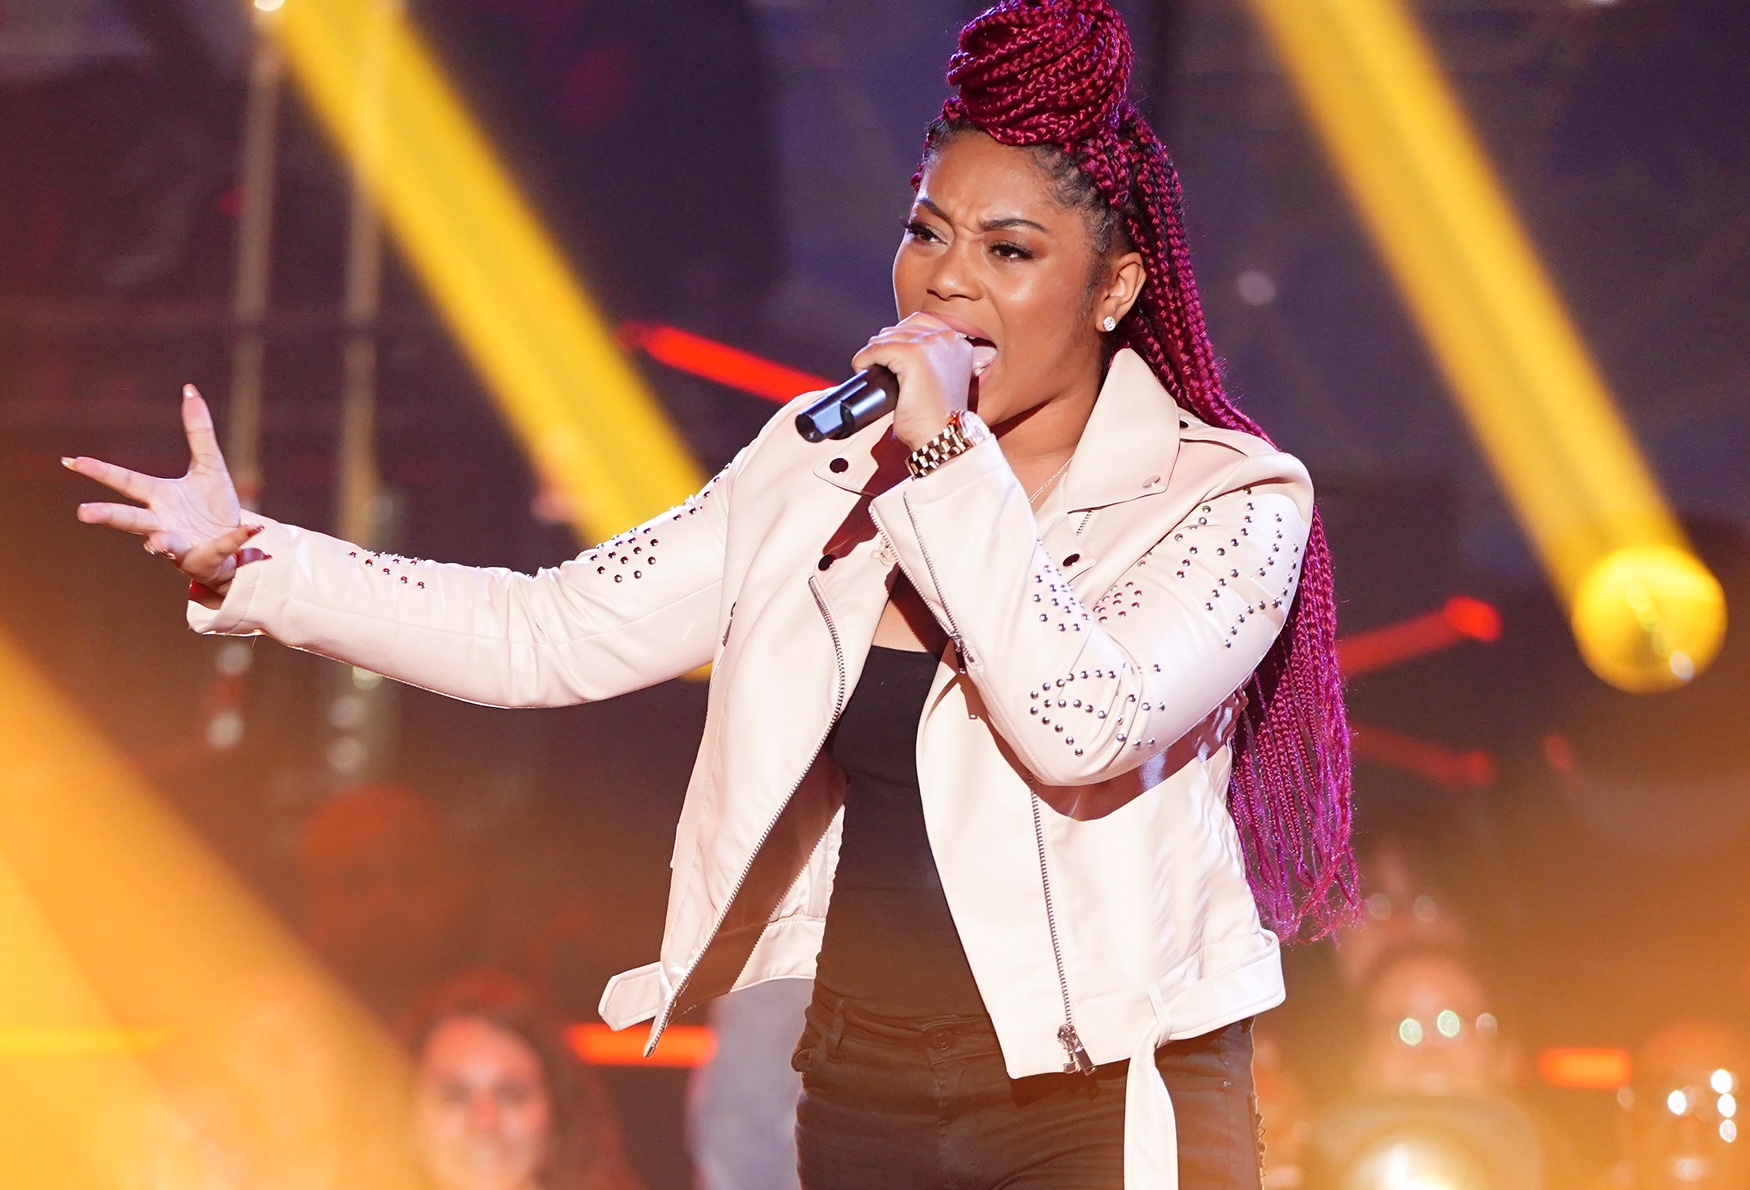 THE FOUR: BATTLE FOR STARDOM: Challenger Lil Bri performs in the 